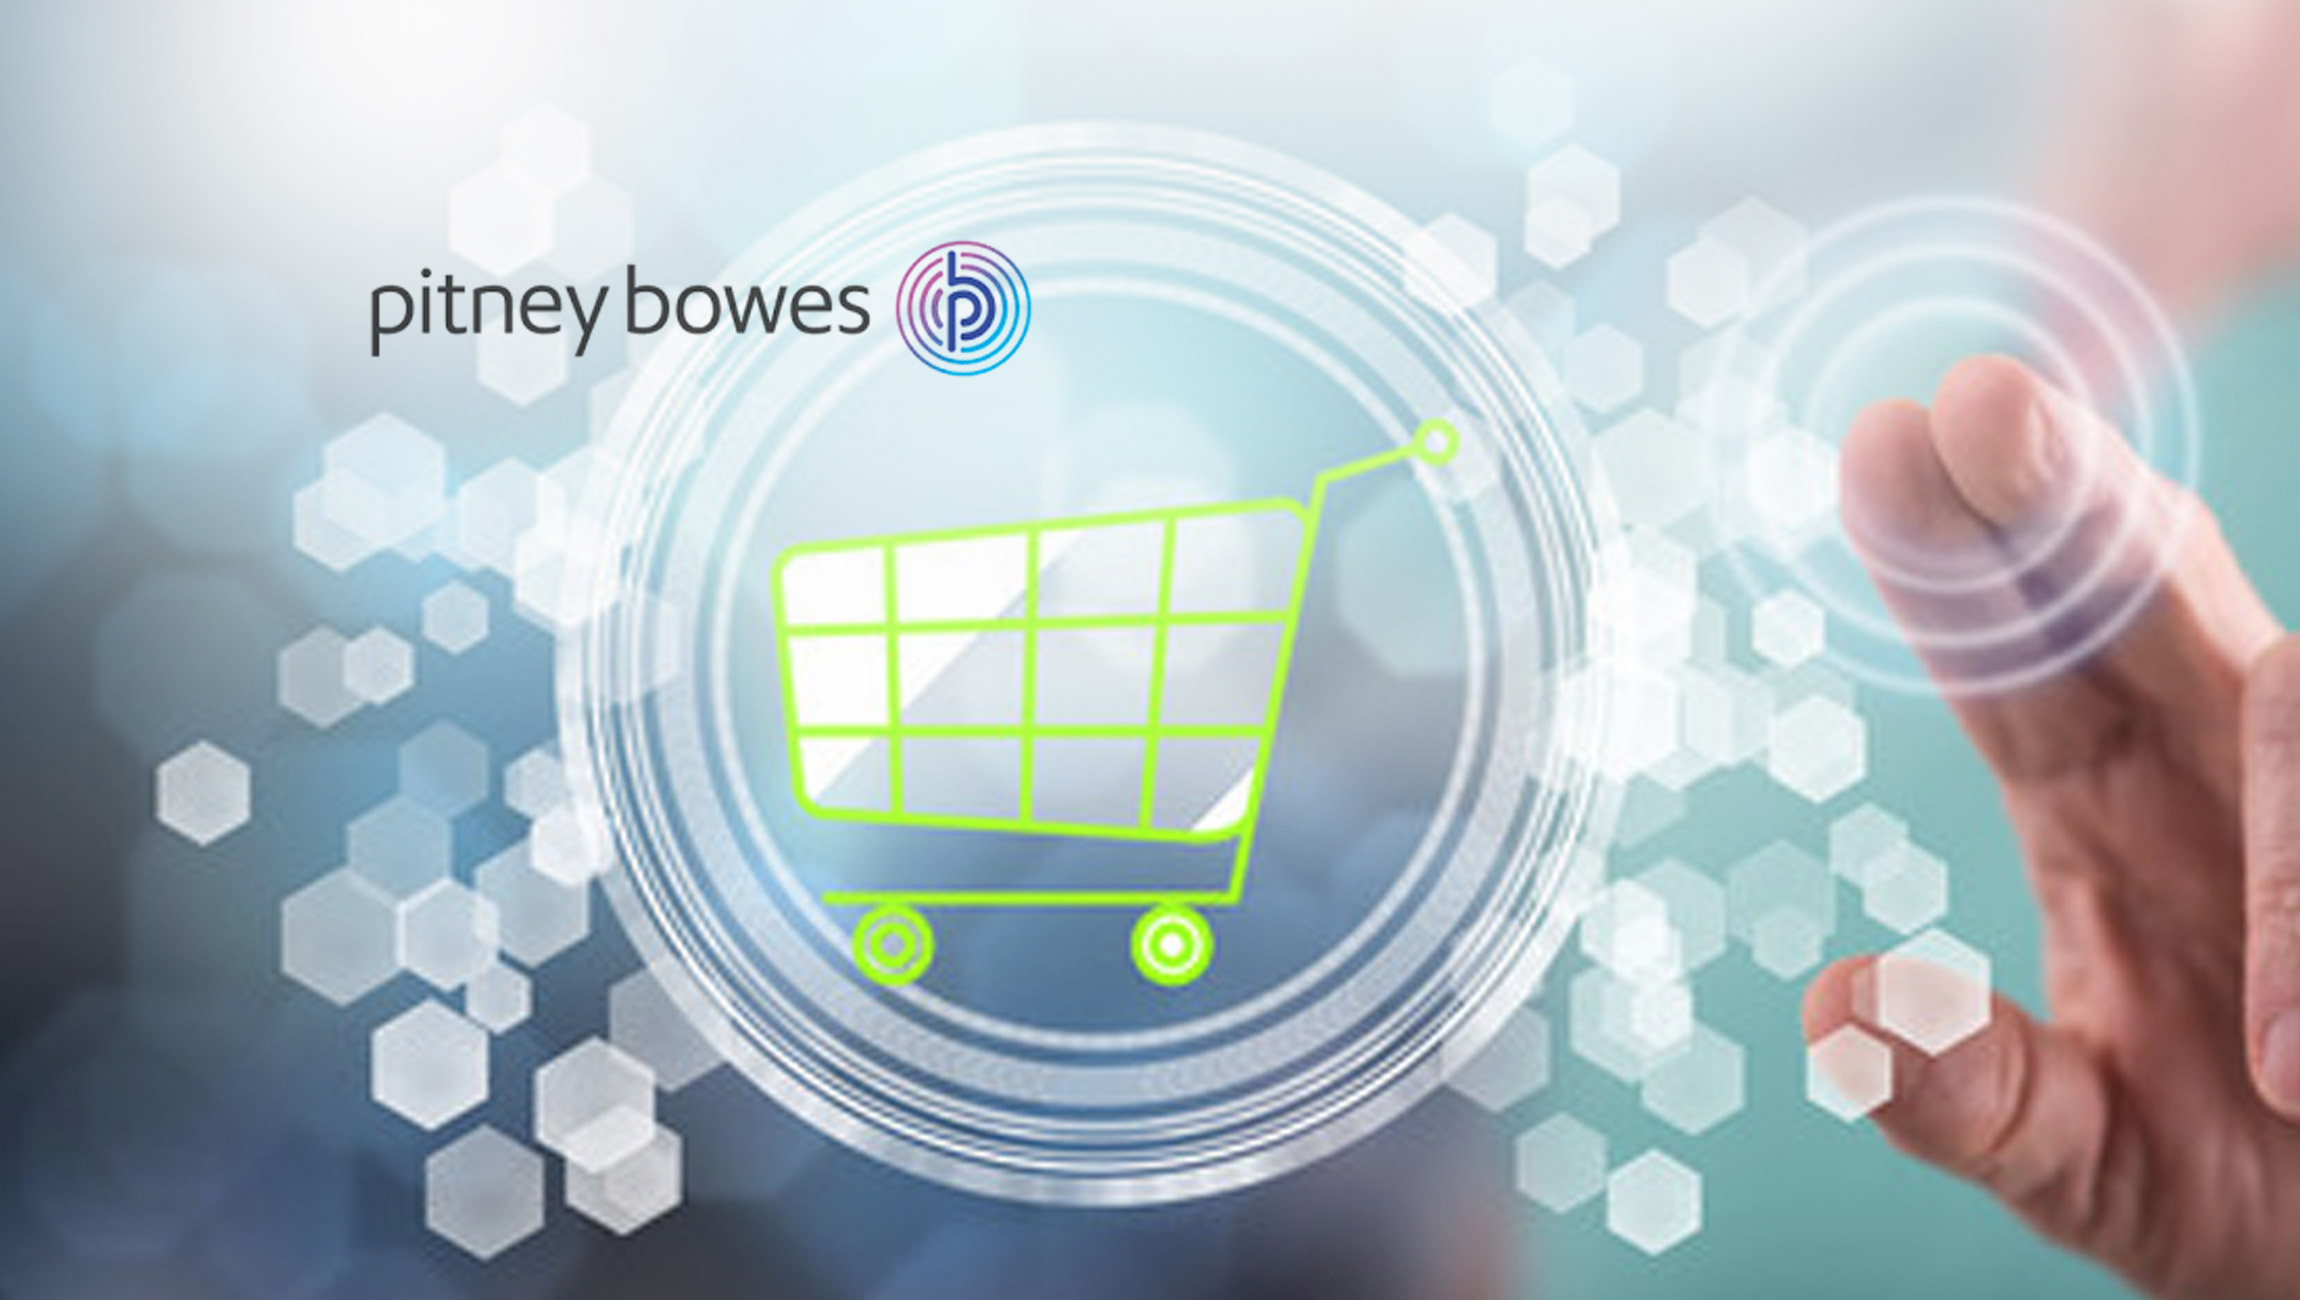 Pitney Bowes Announces 2023 Price Increase for Ecommerce Services